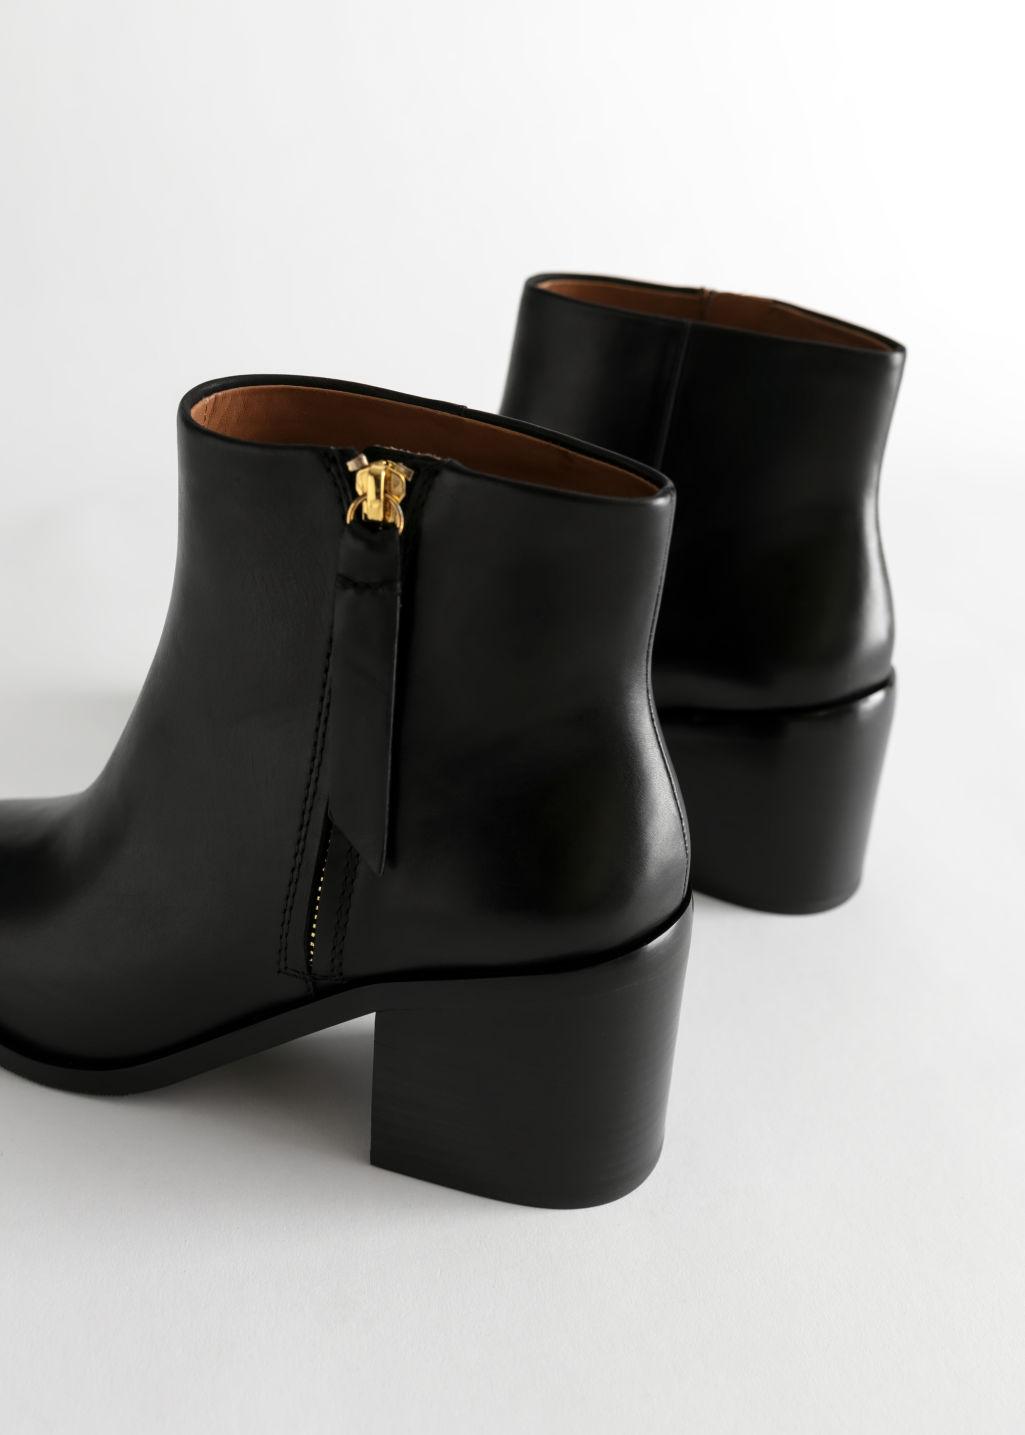 & Other Stories Pointed Leather Ankle Boots in Black | Lyst